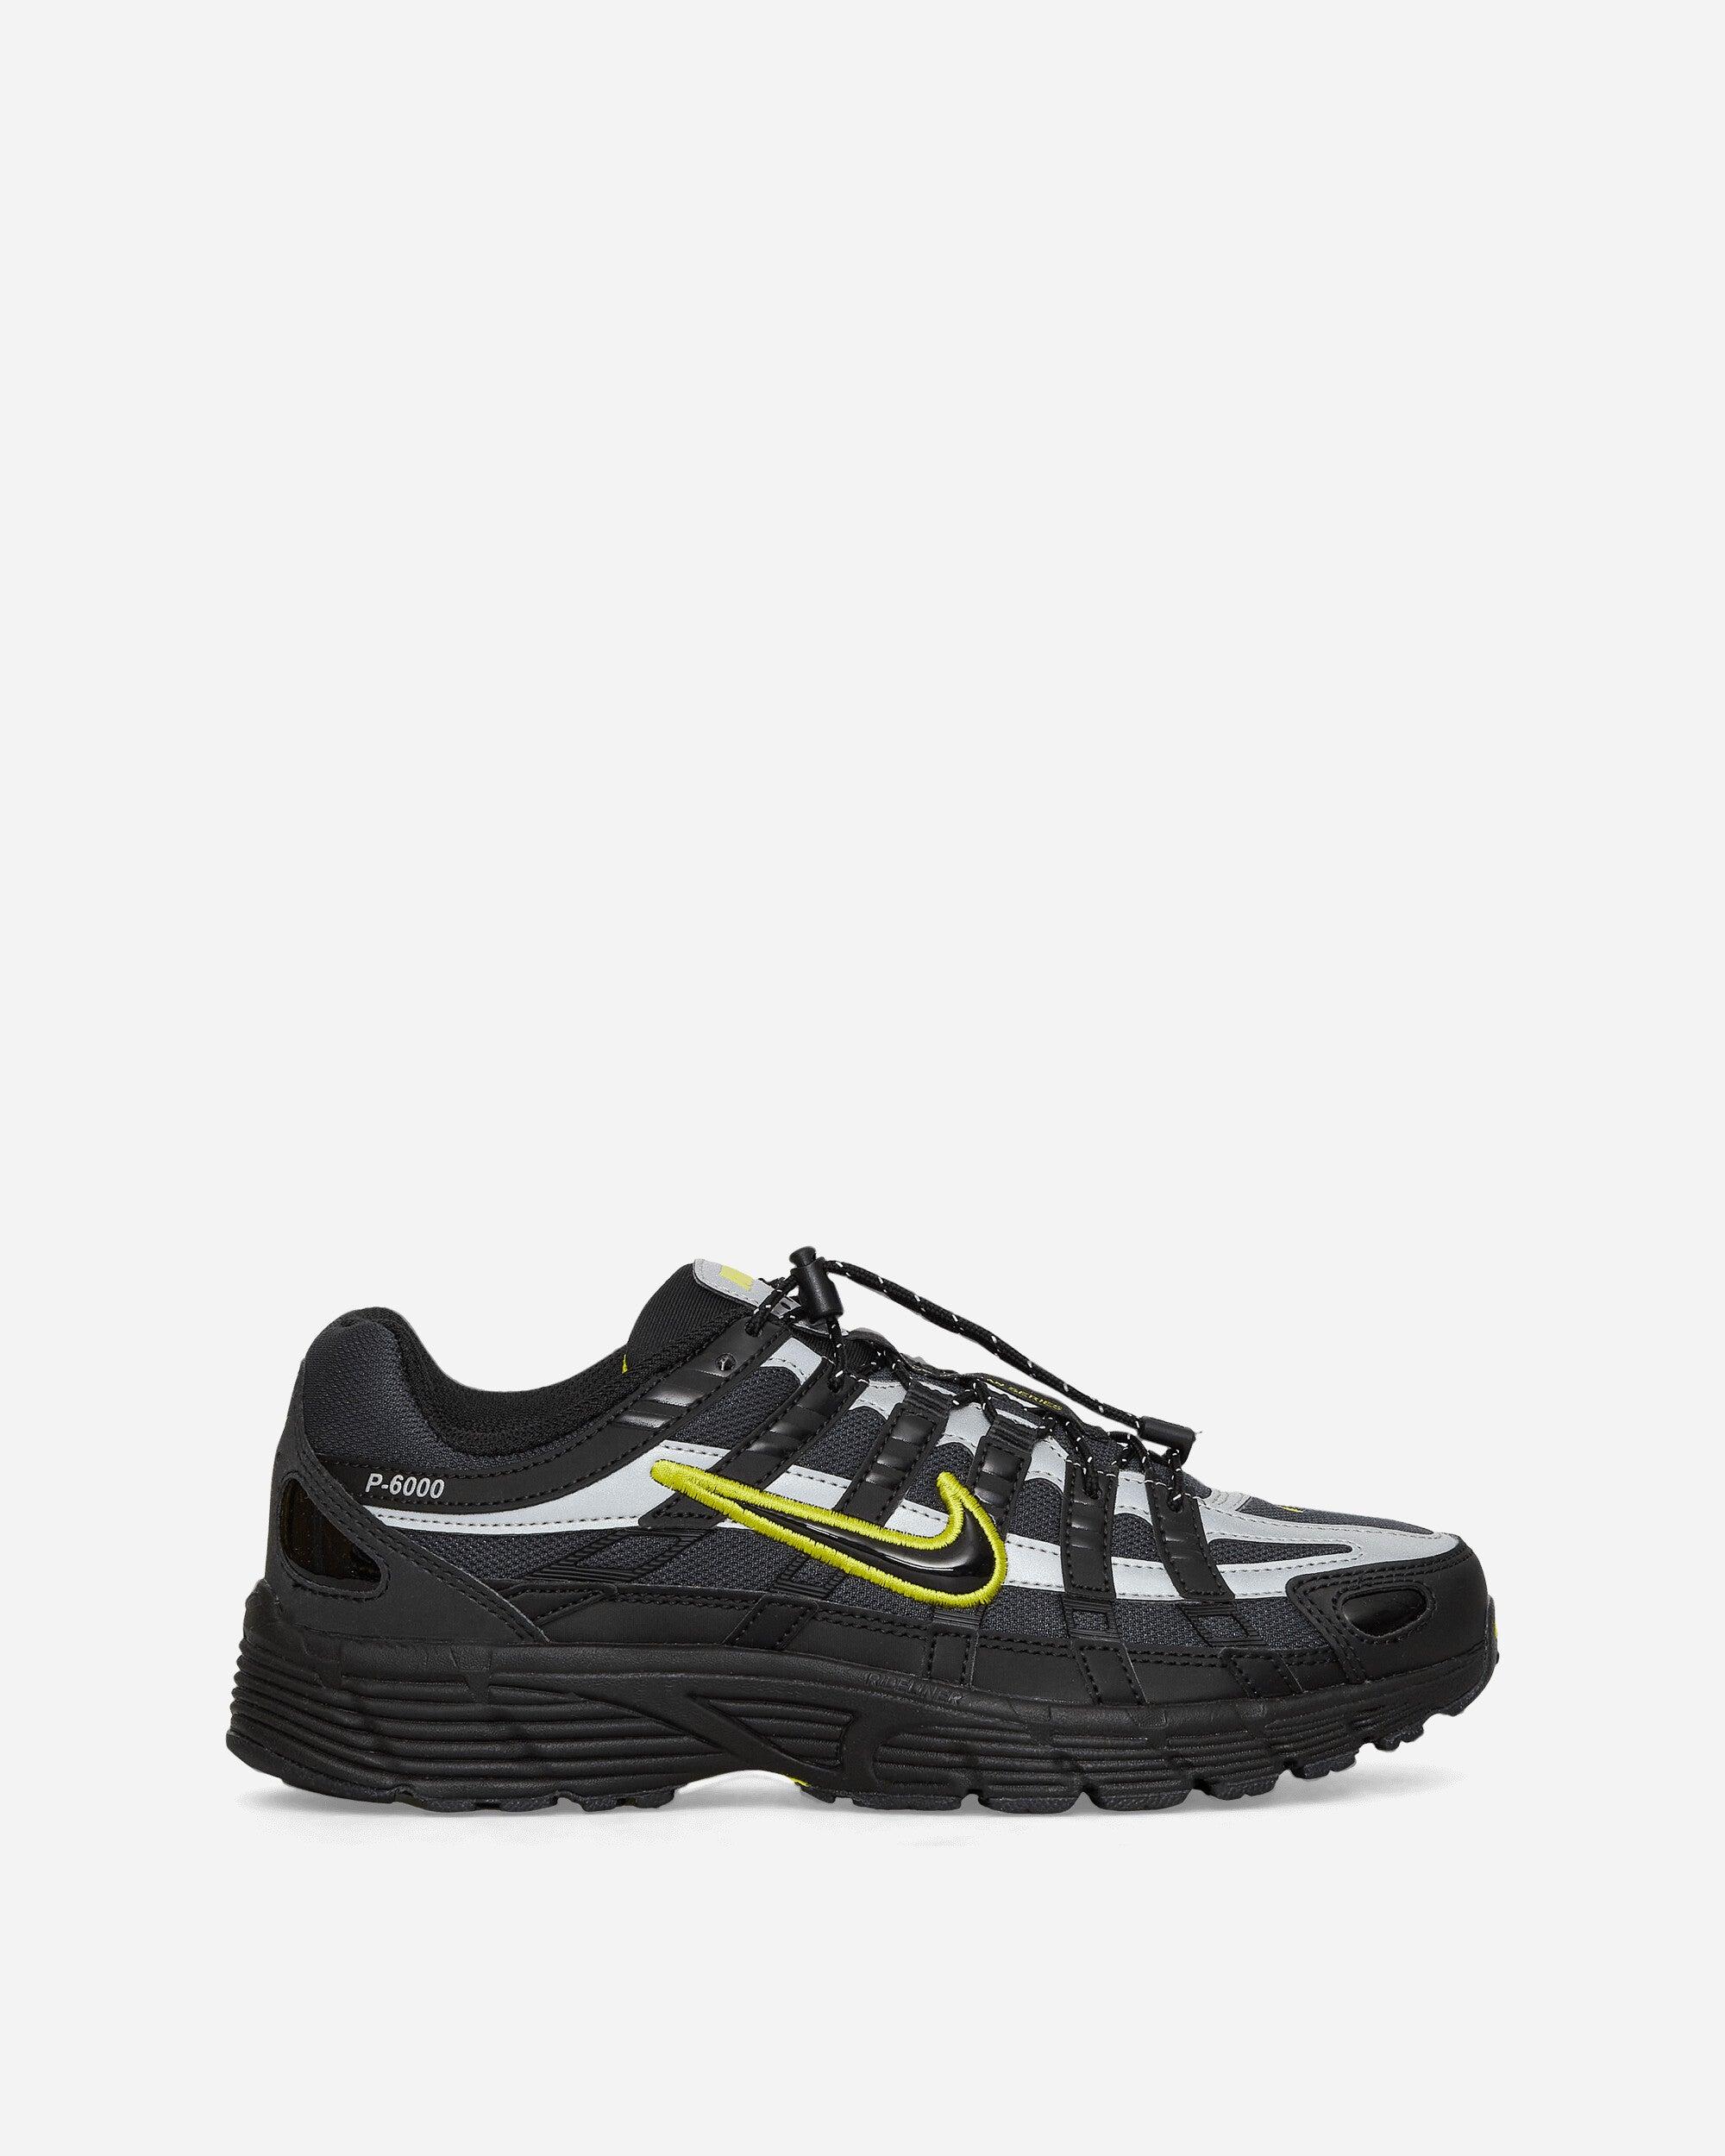 Nike Wmns P-6000 Sneakers Anthracite / Black / Volt for Men | Lyst